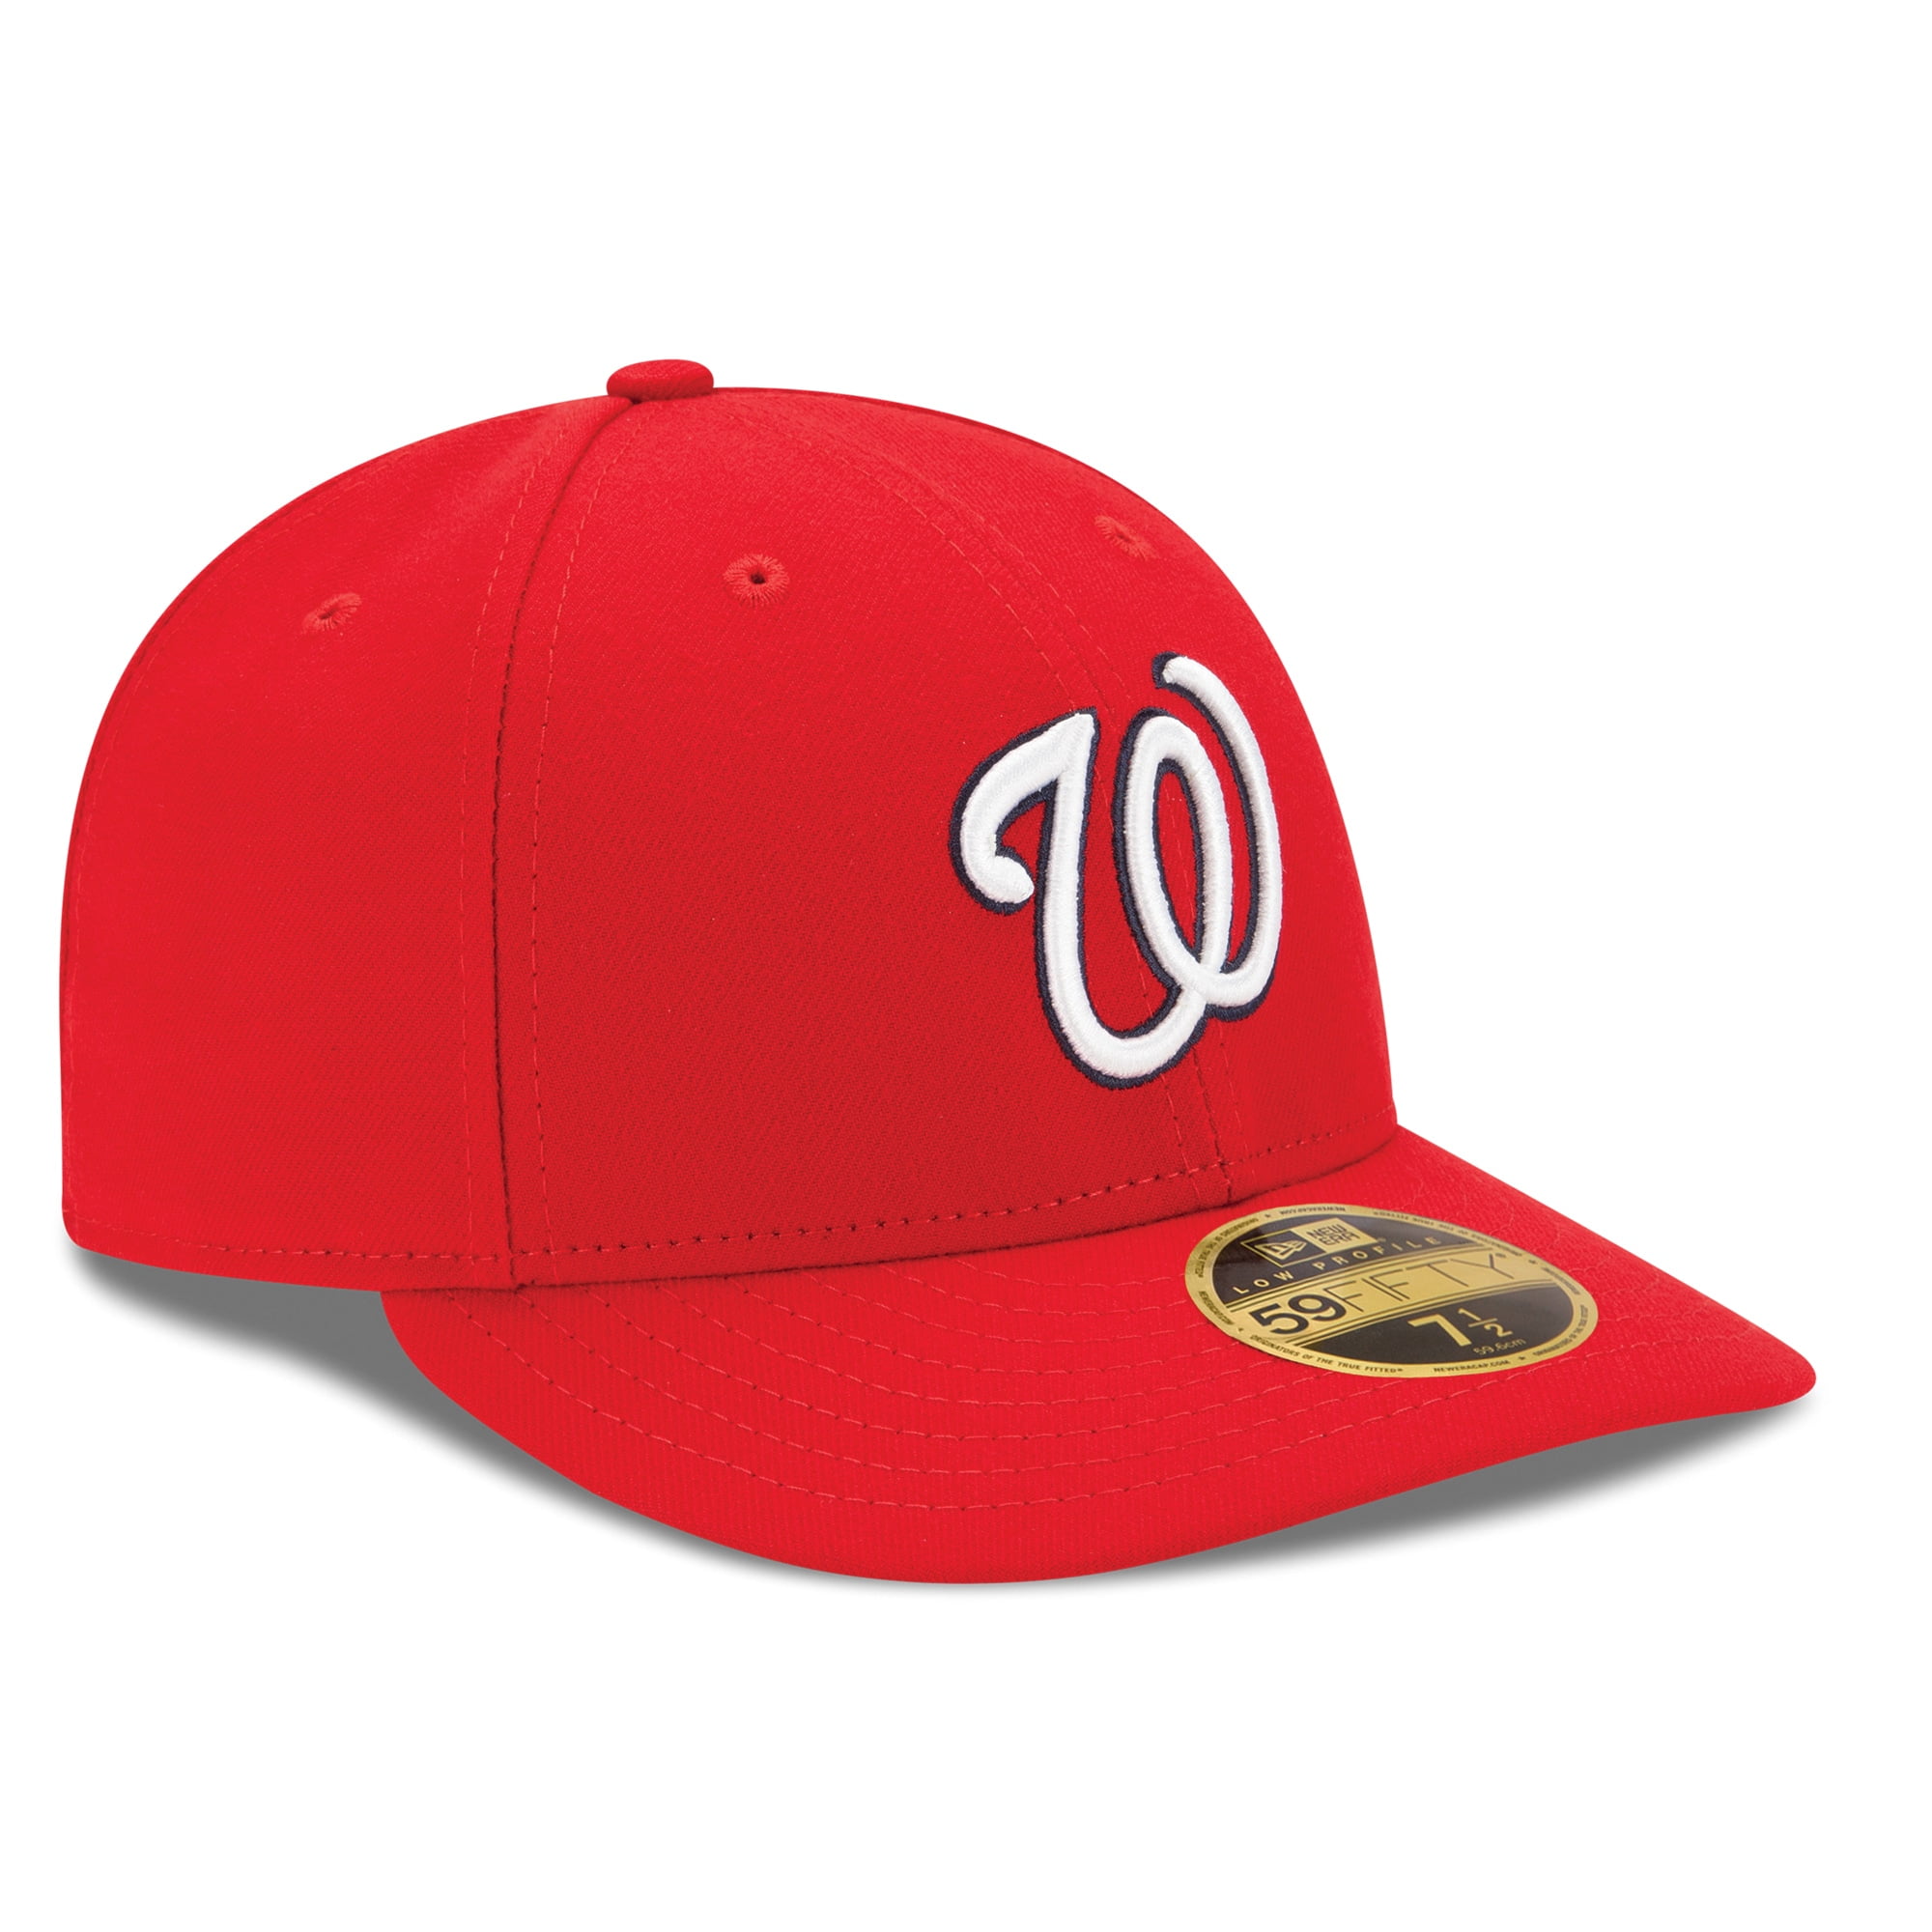 New Era Washington Nationals 59FIFTY Authentic Collection Hat Red 7 3/8